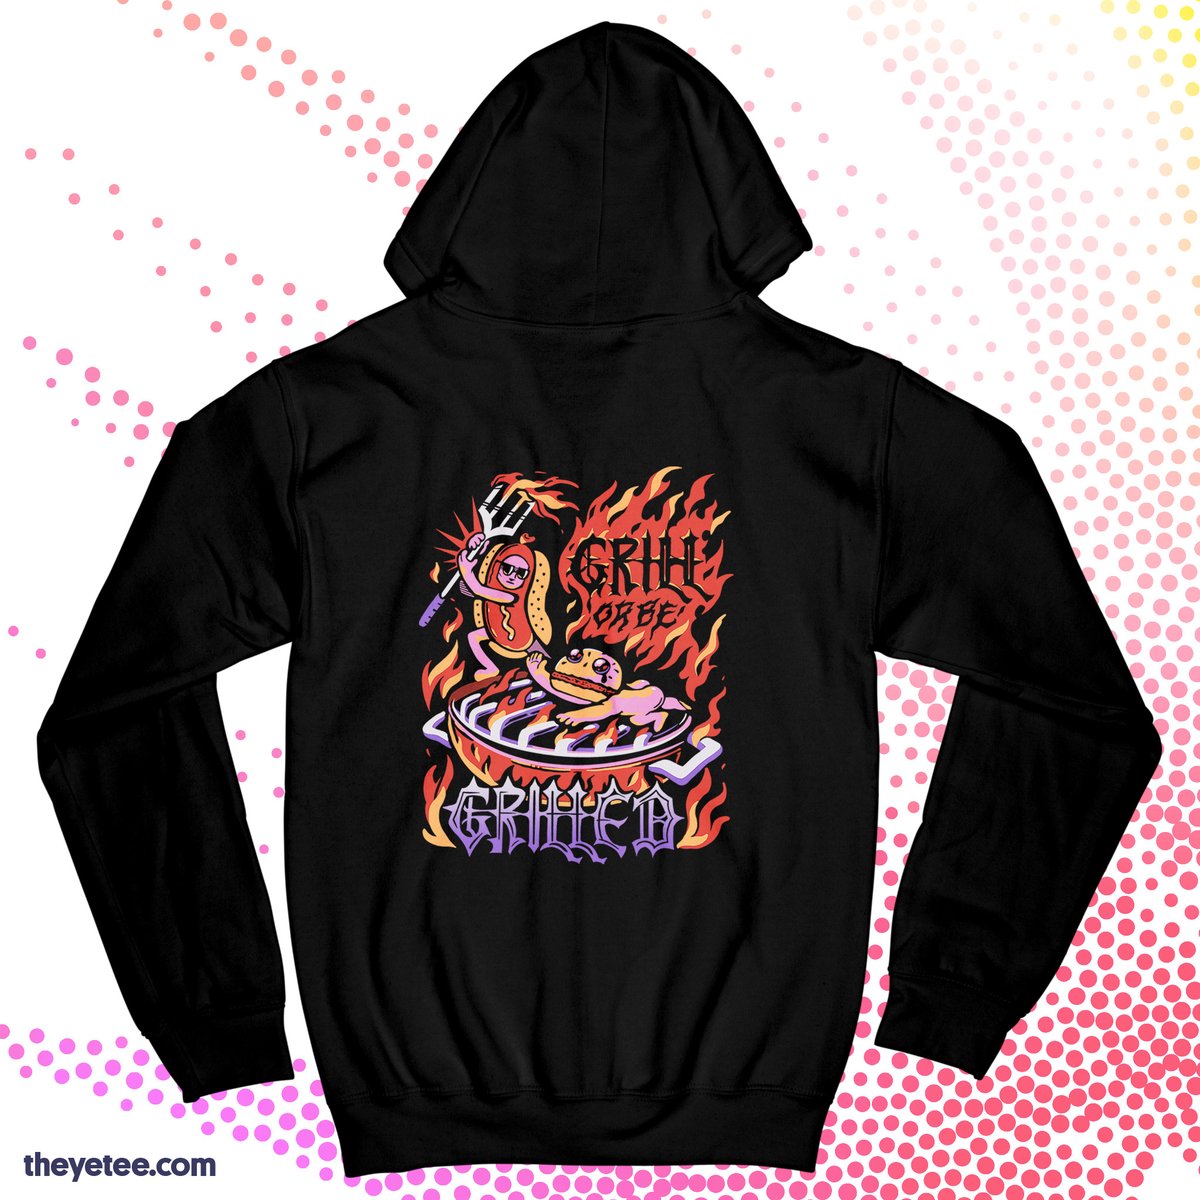 「Some people are cut out for the grill li」|The Yetee 🌈のイラスト